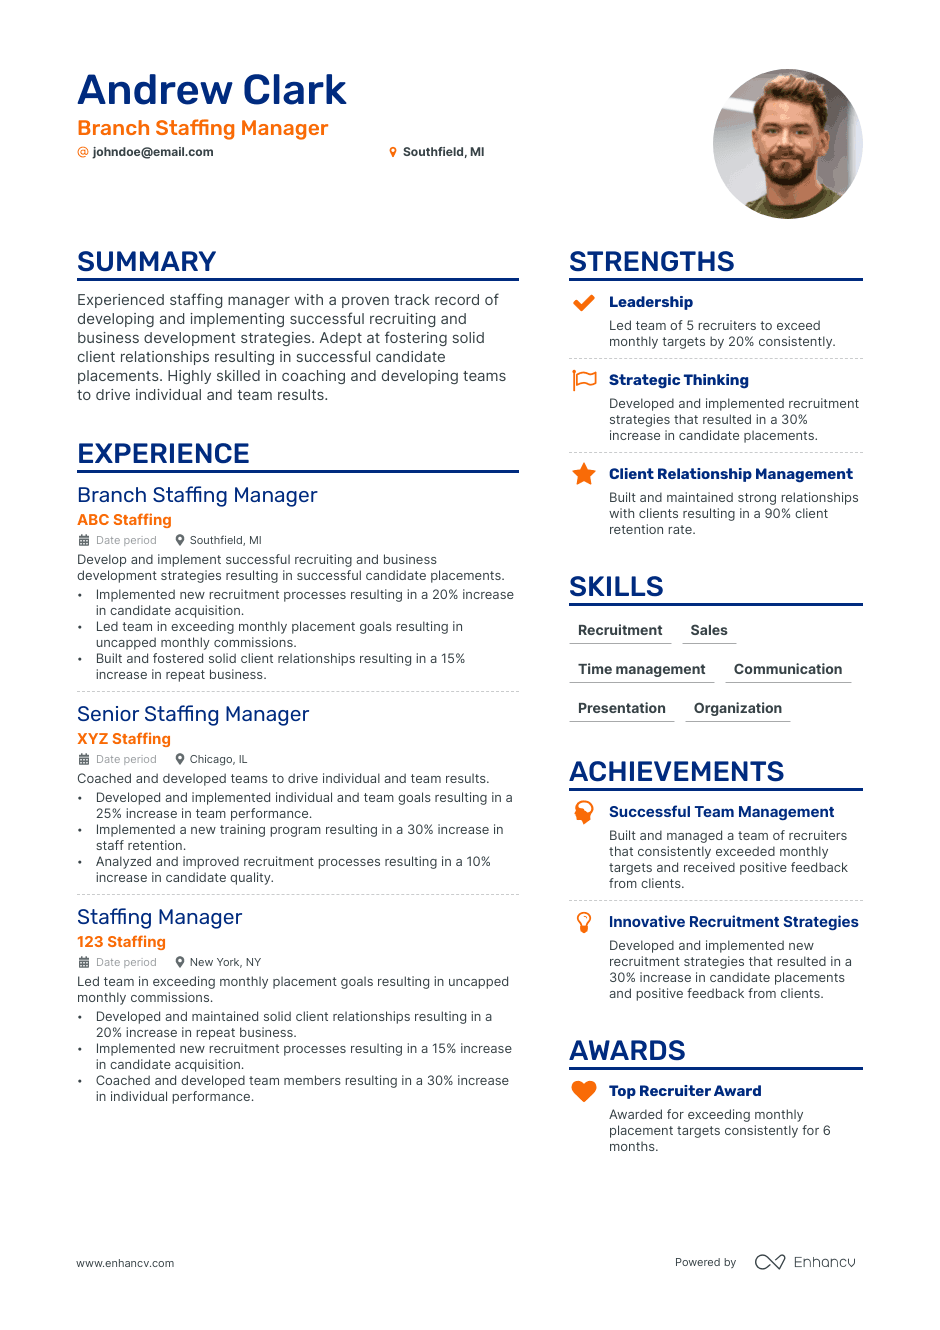 Staffing Manager resume example